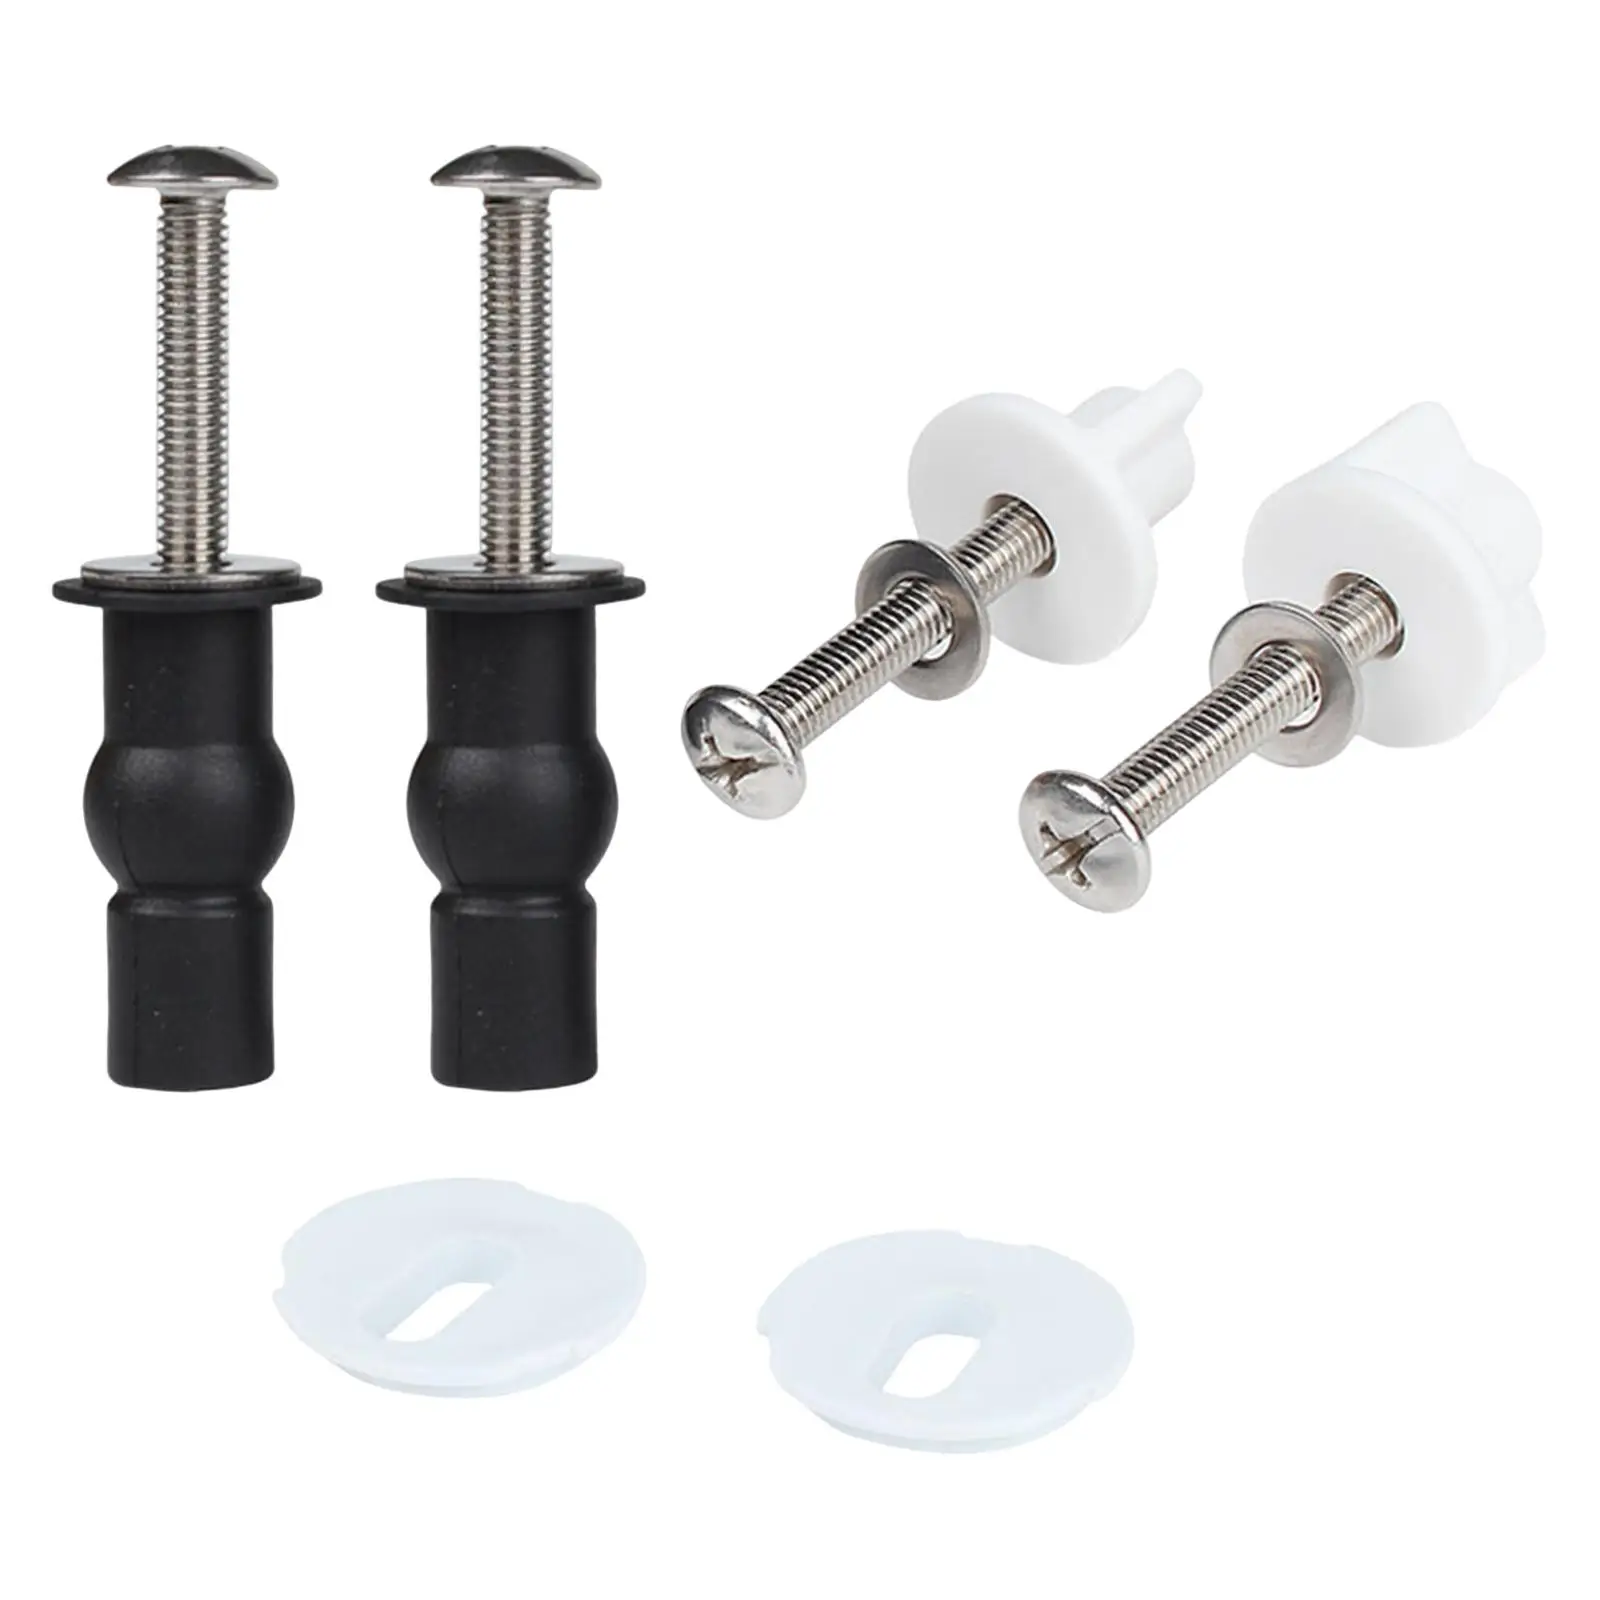 2 Pieces Toilet Seat Hinge Bolts and Screw Fixing Fittings Hardware Bathroom Toilet Repair Screw Top Mounted Toilet Seat Hinges